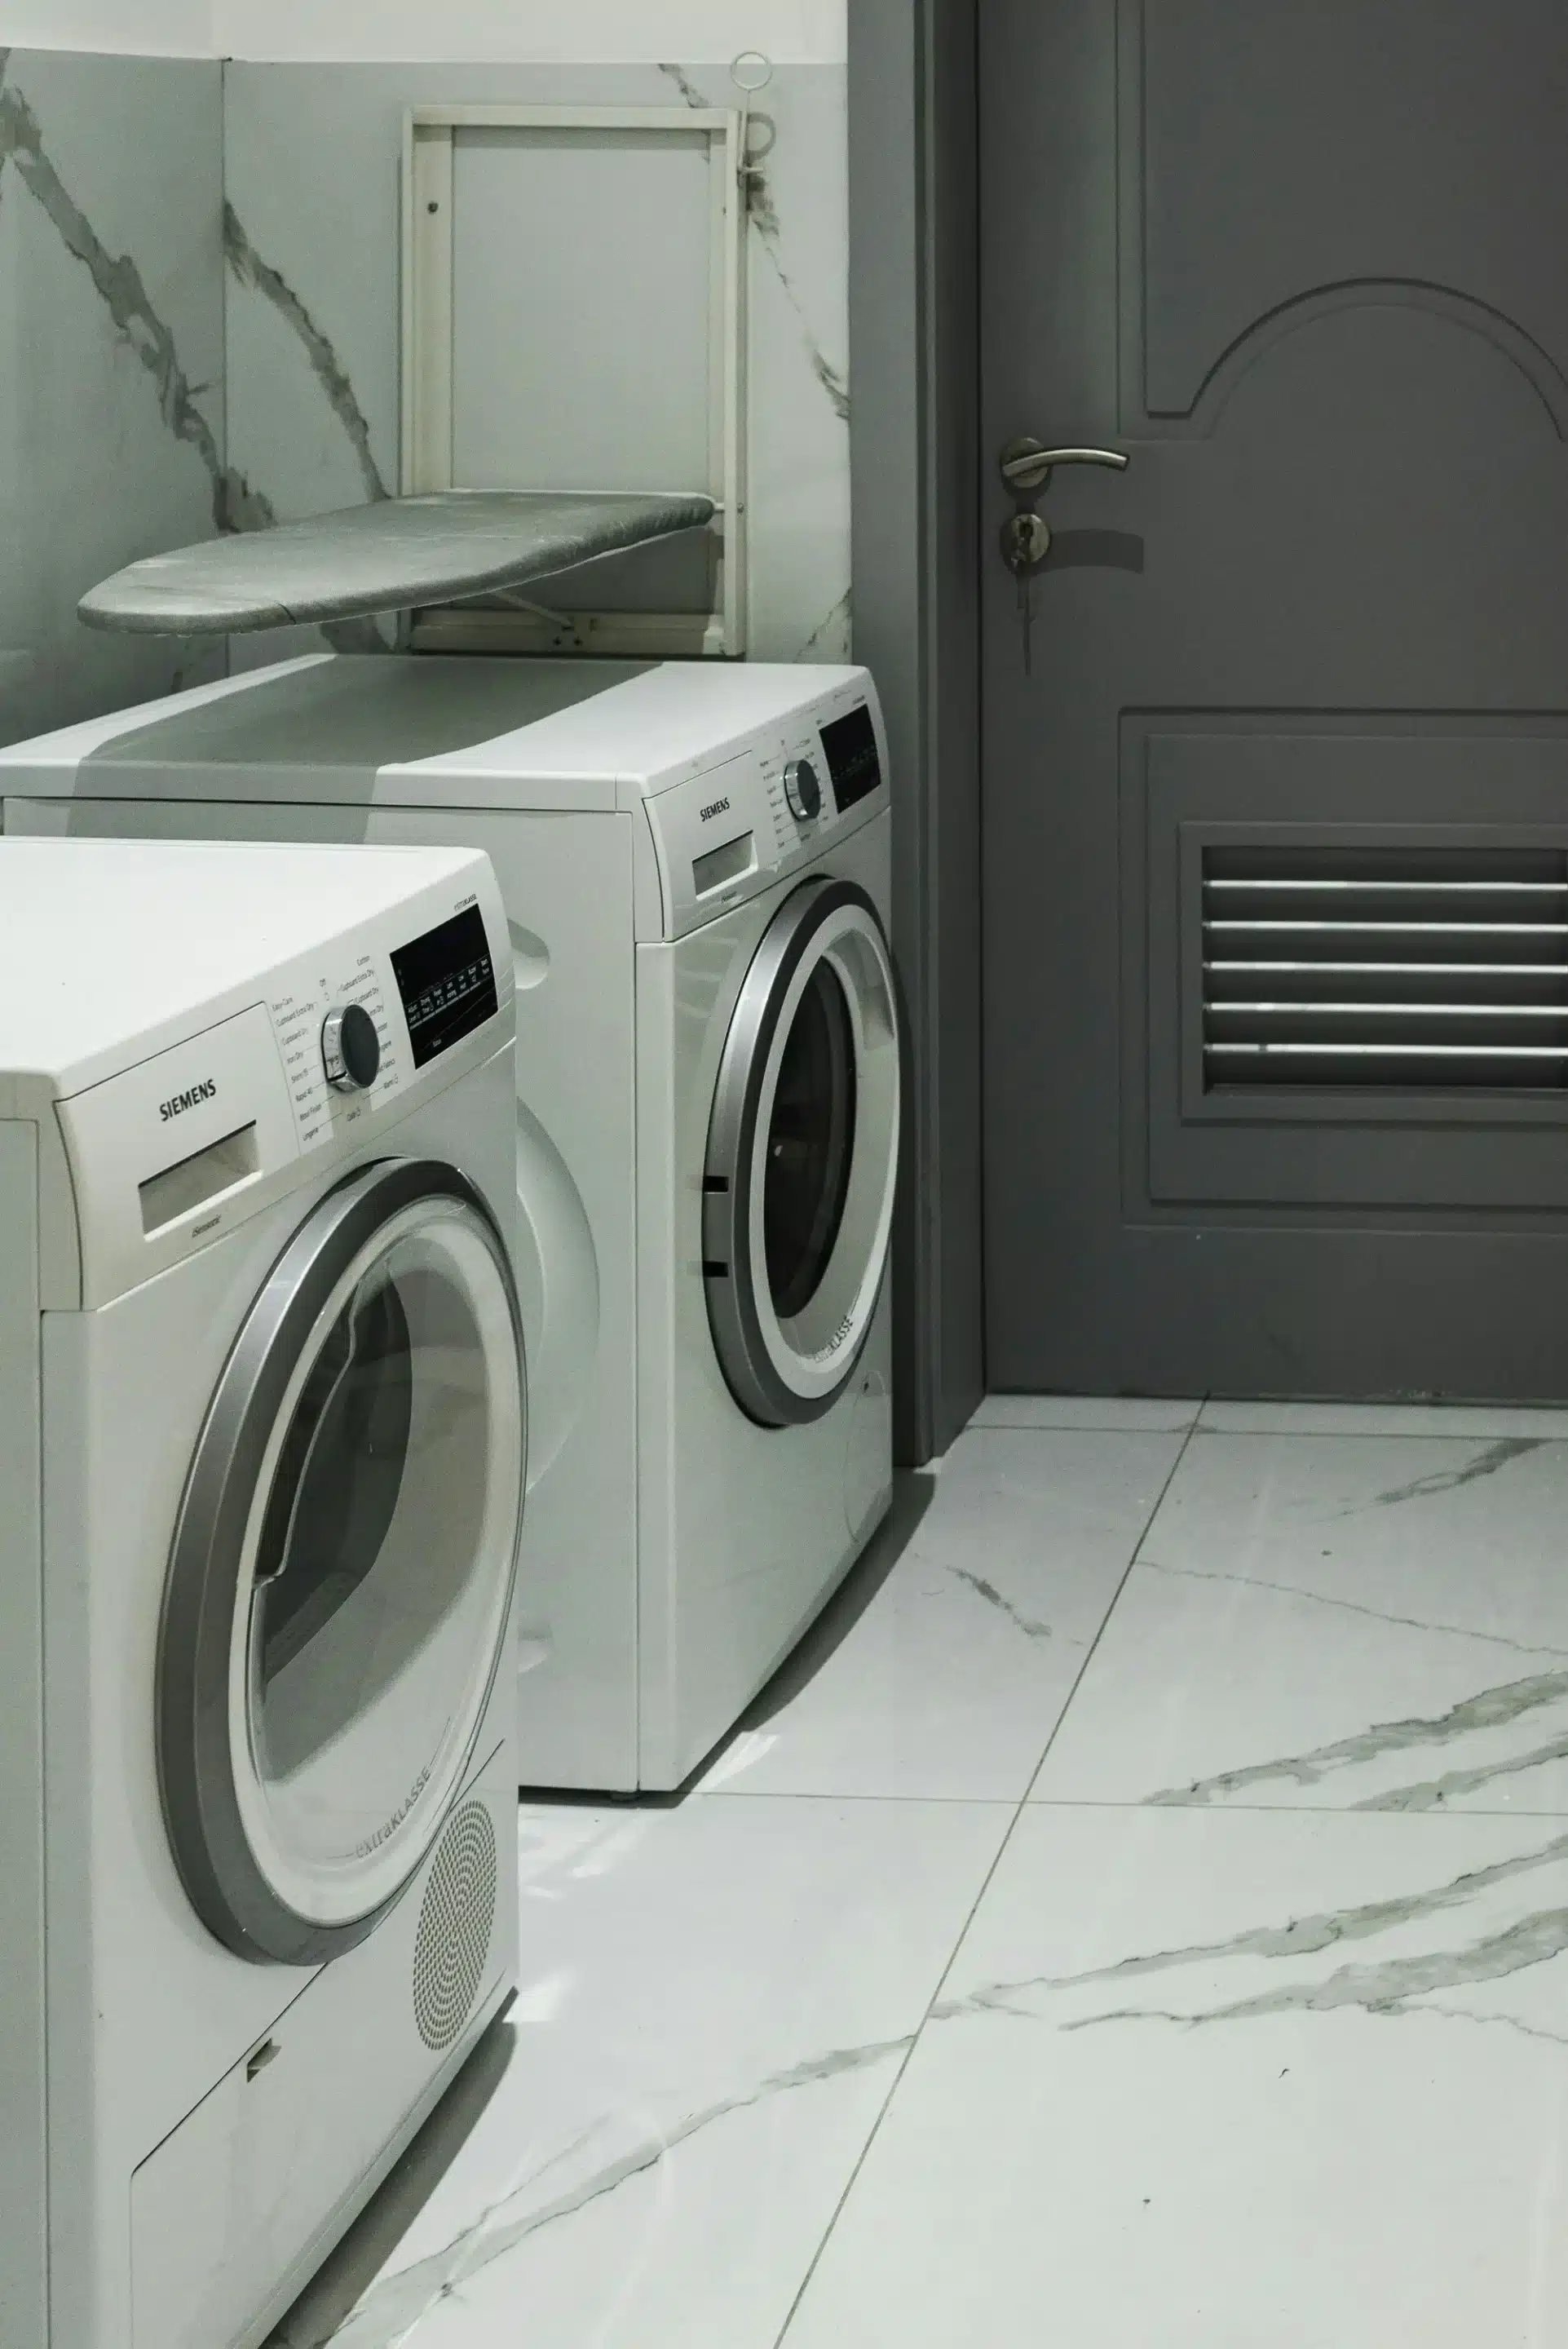 What is the typical lifespan of a washer and dryer?